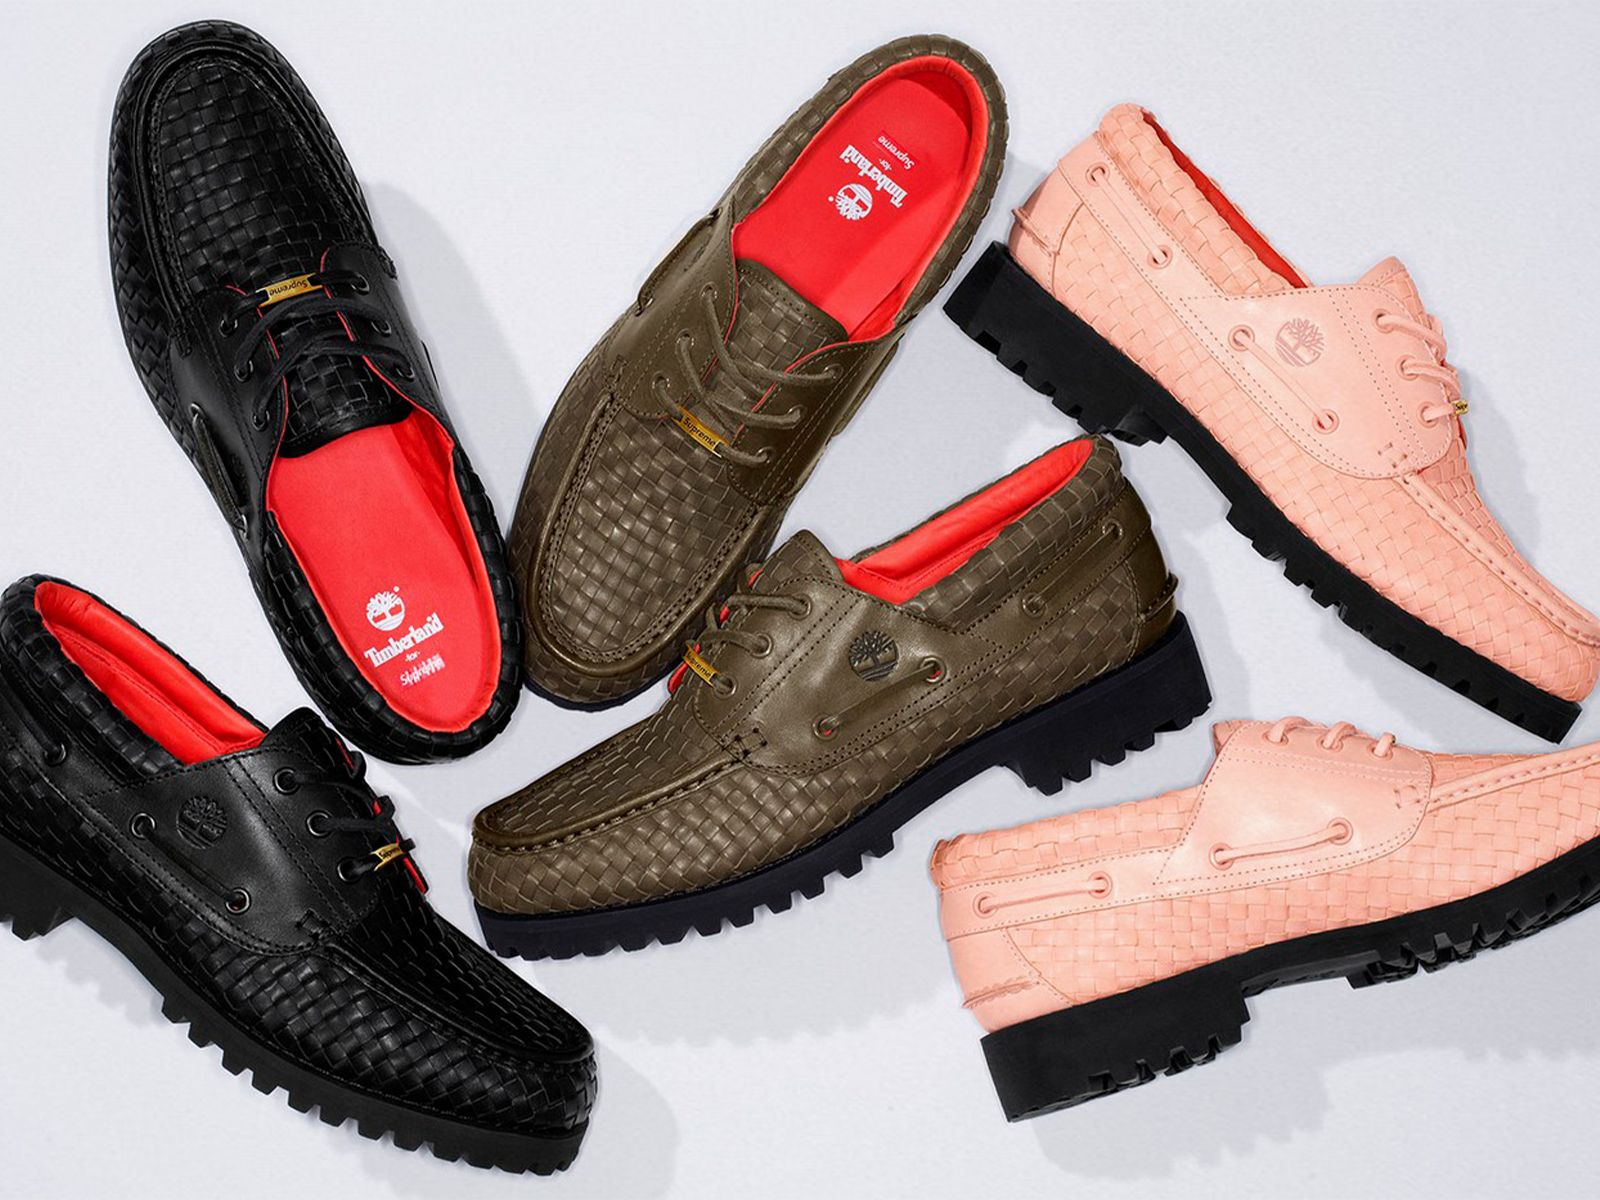 Supreme revamps Timberland’s classic boat shoe